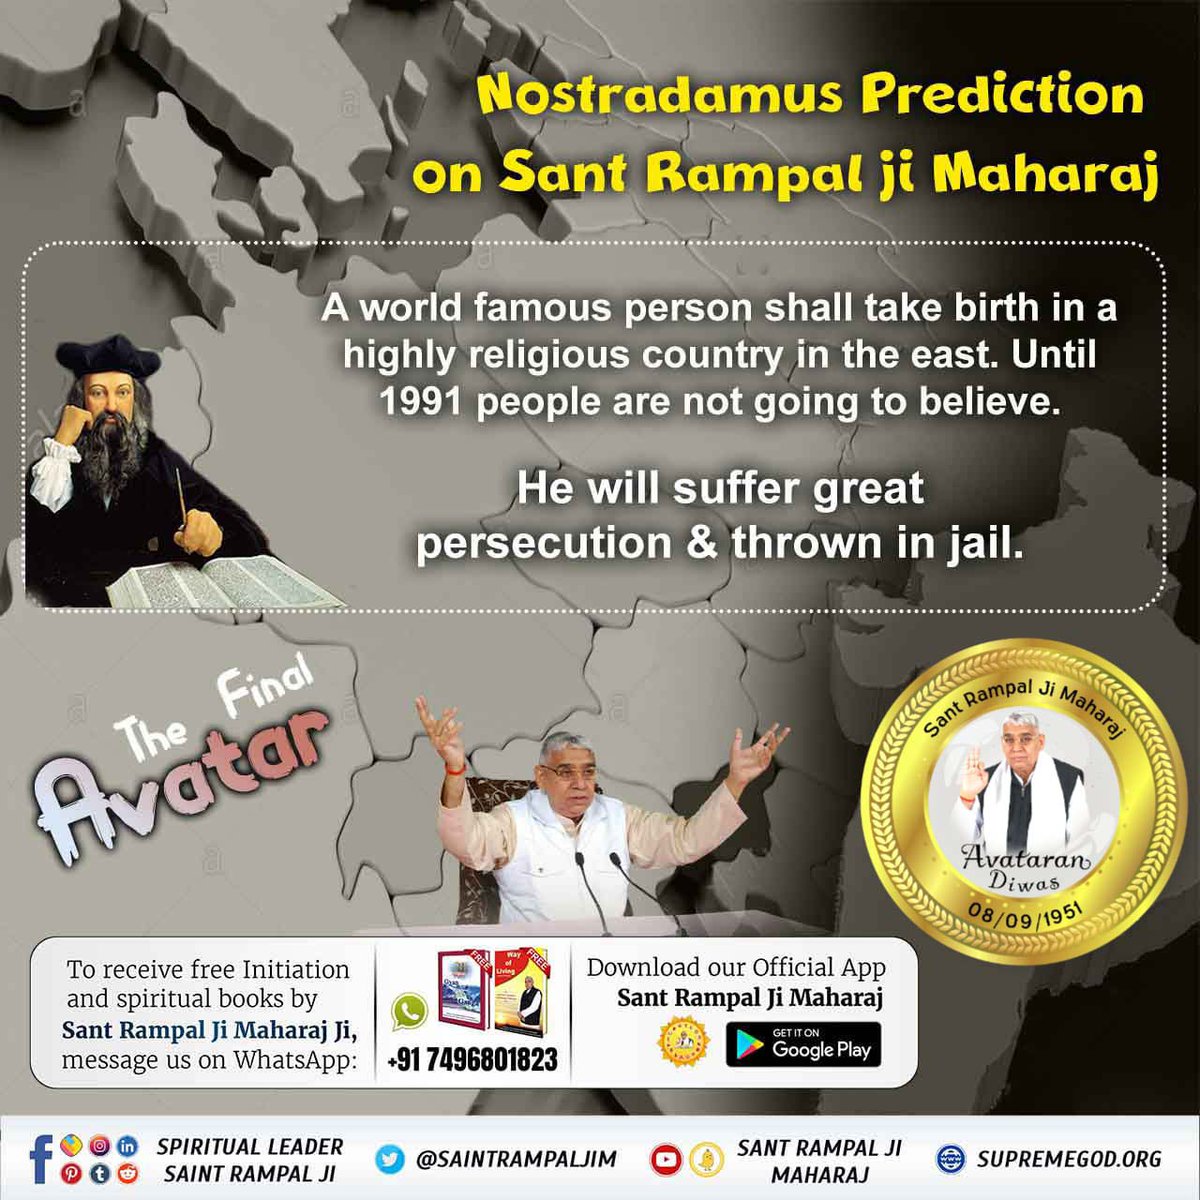 #1DayLeft_For_AvataranDiwas According to the prophet Nostradamus, that great saint will incarnate on a land like India, that great saint is Sant Rampal Ji Maharaj only.